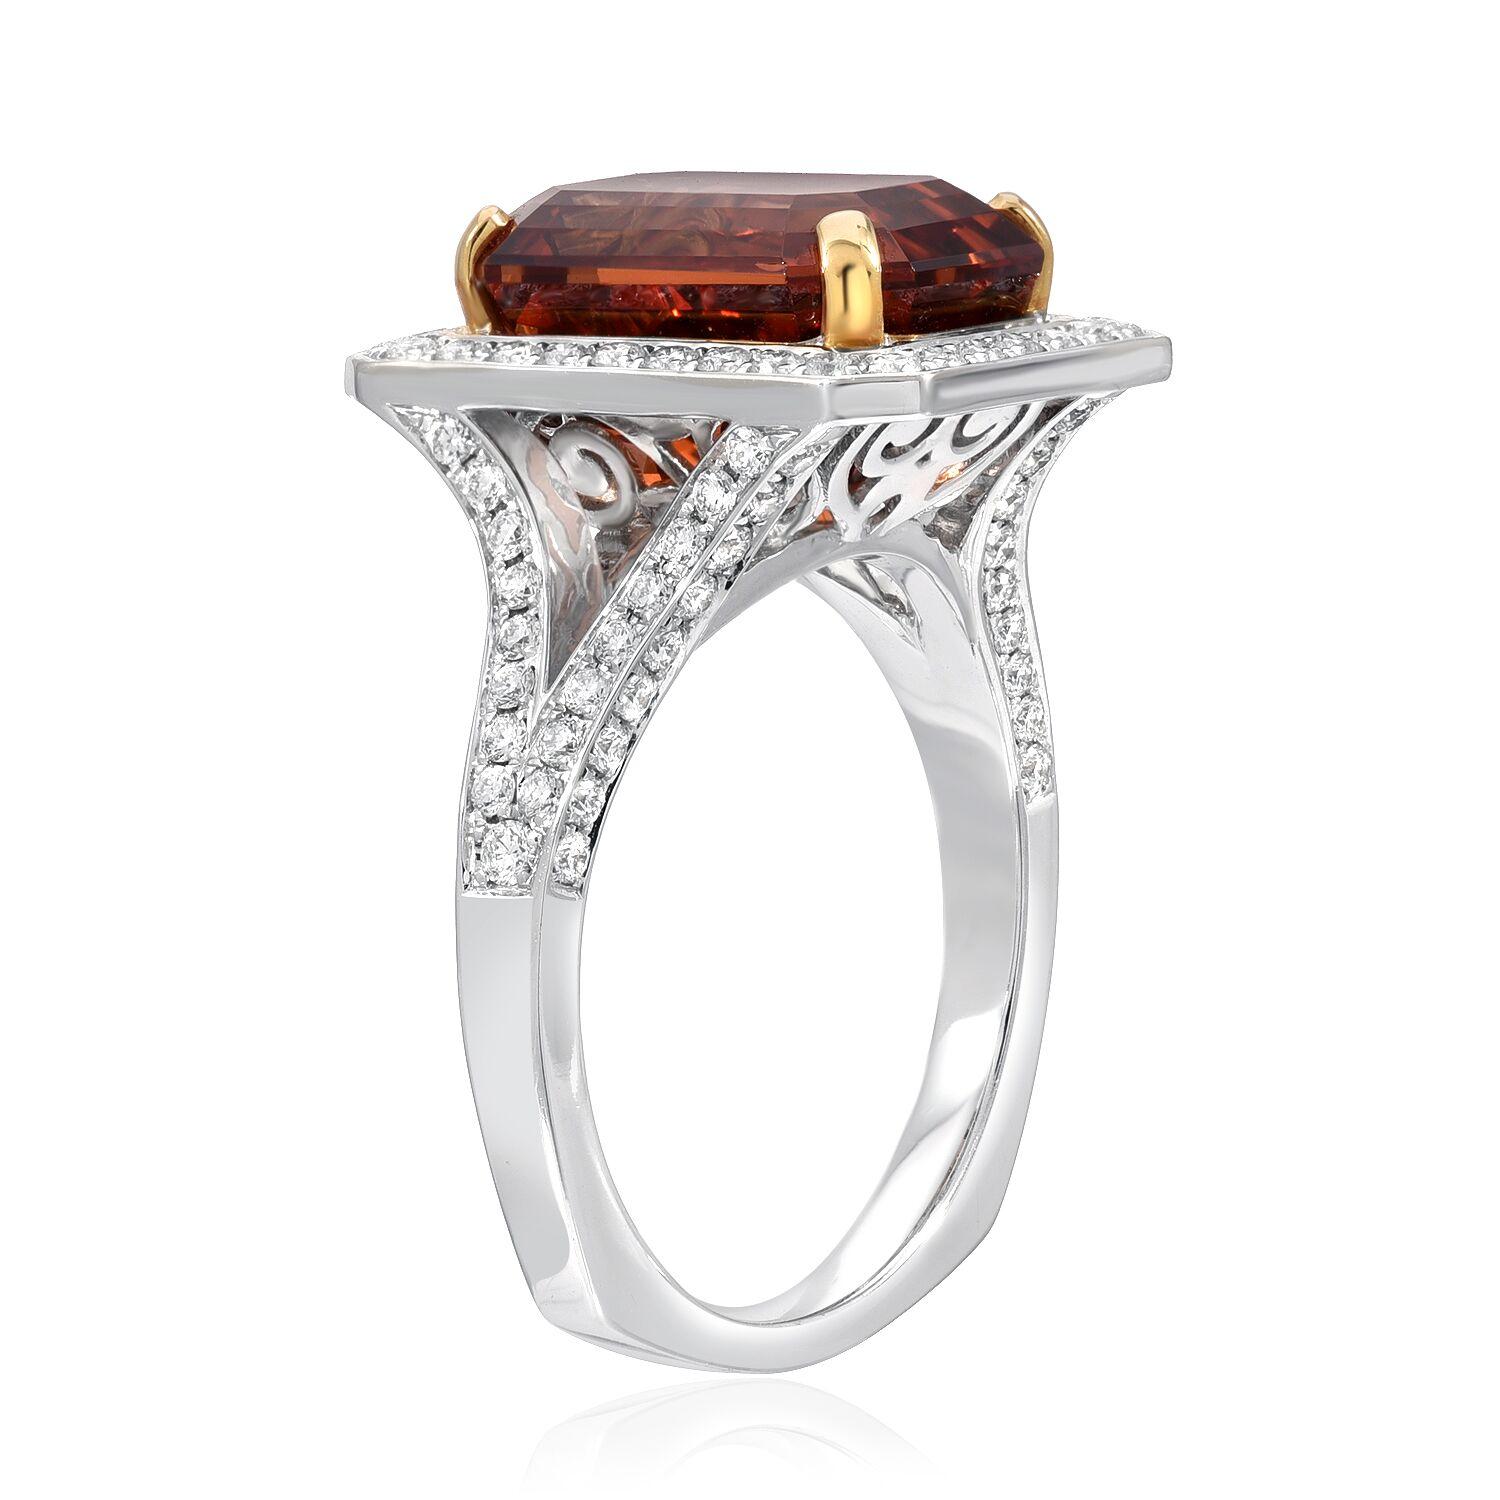 Mandarin Garnet ring, showcasing an 8.73 carat emerald cut, secured by 18K yellow gold prongs, and hand set in a diamond setting weighing a total of 1.02 carats, in 18K white gold.
Ring size 6.5. Re-sizing is complimentary upon request.
Returns are